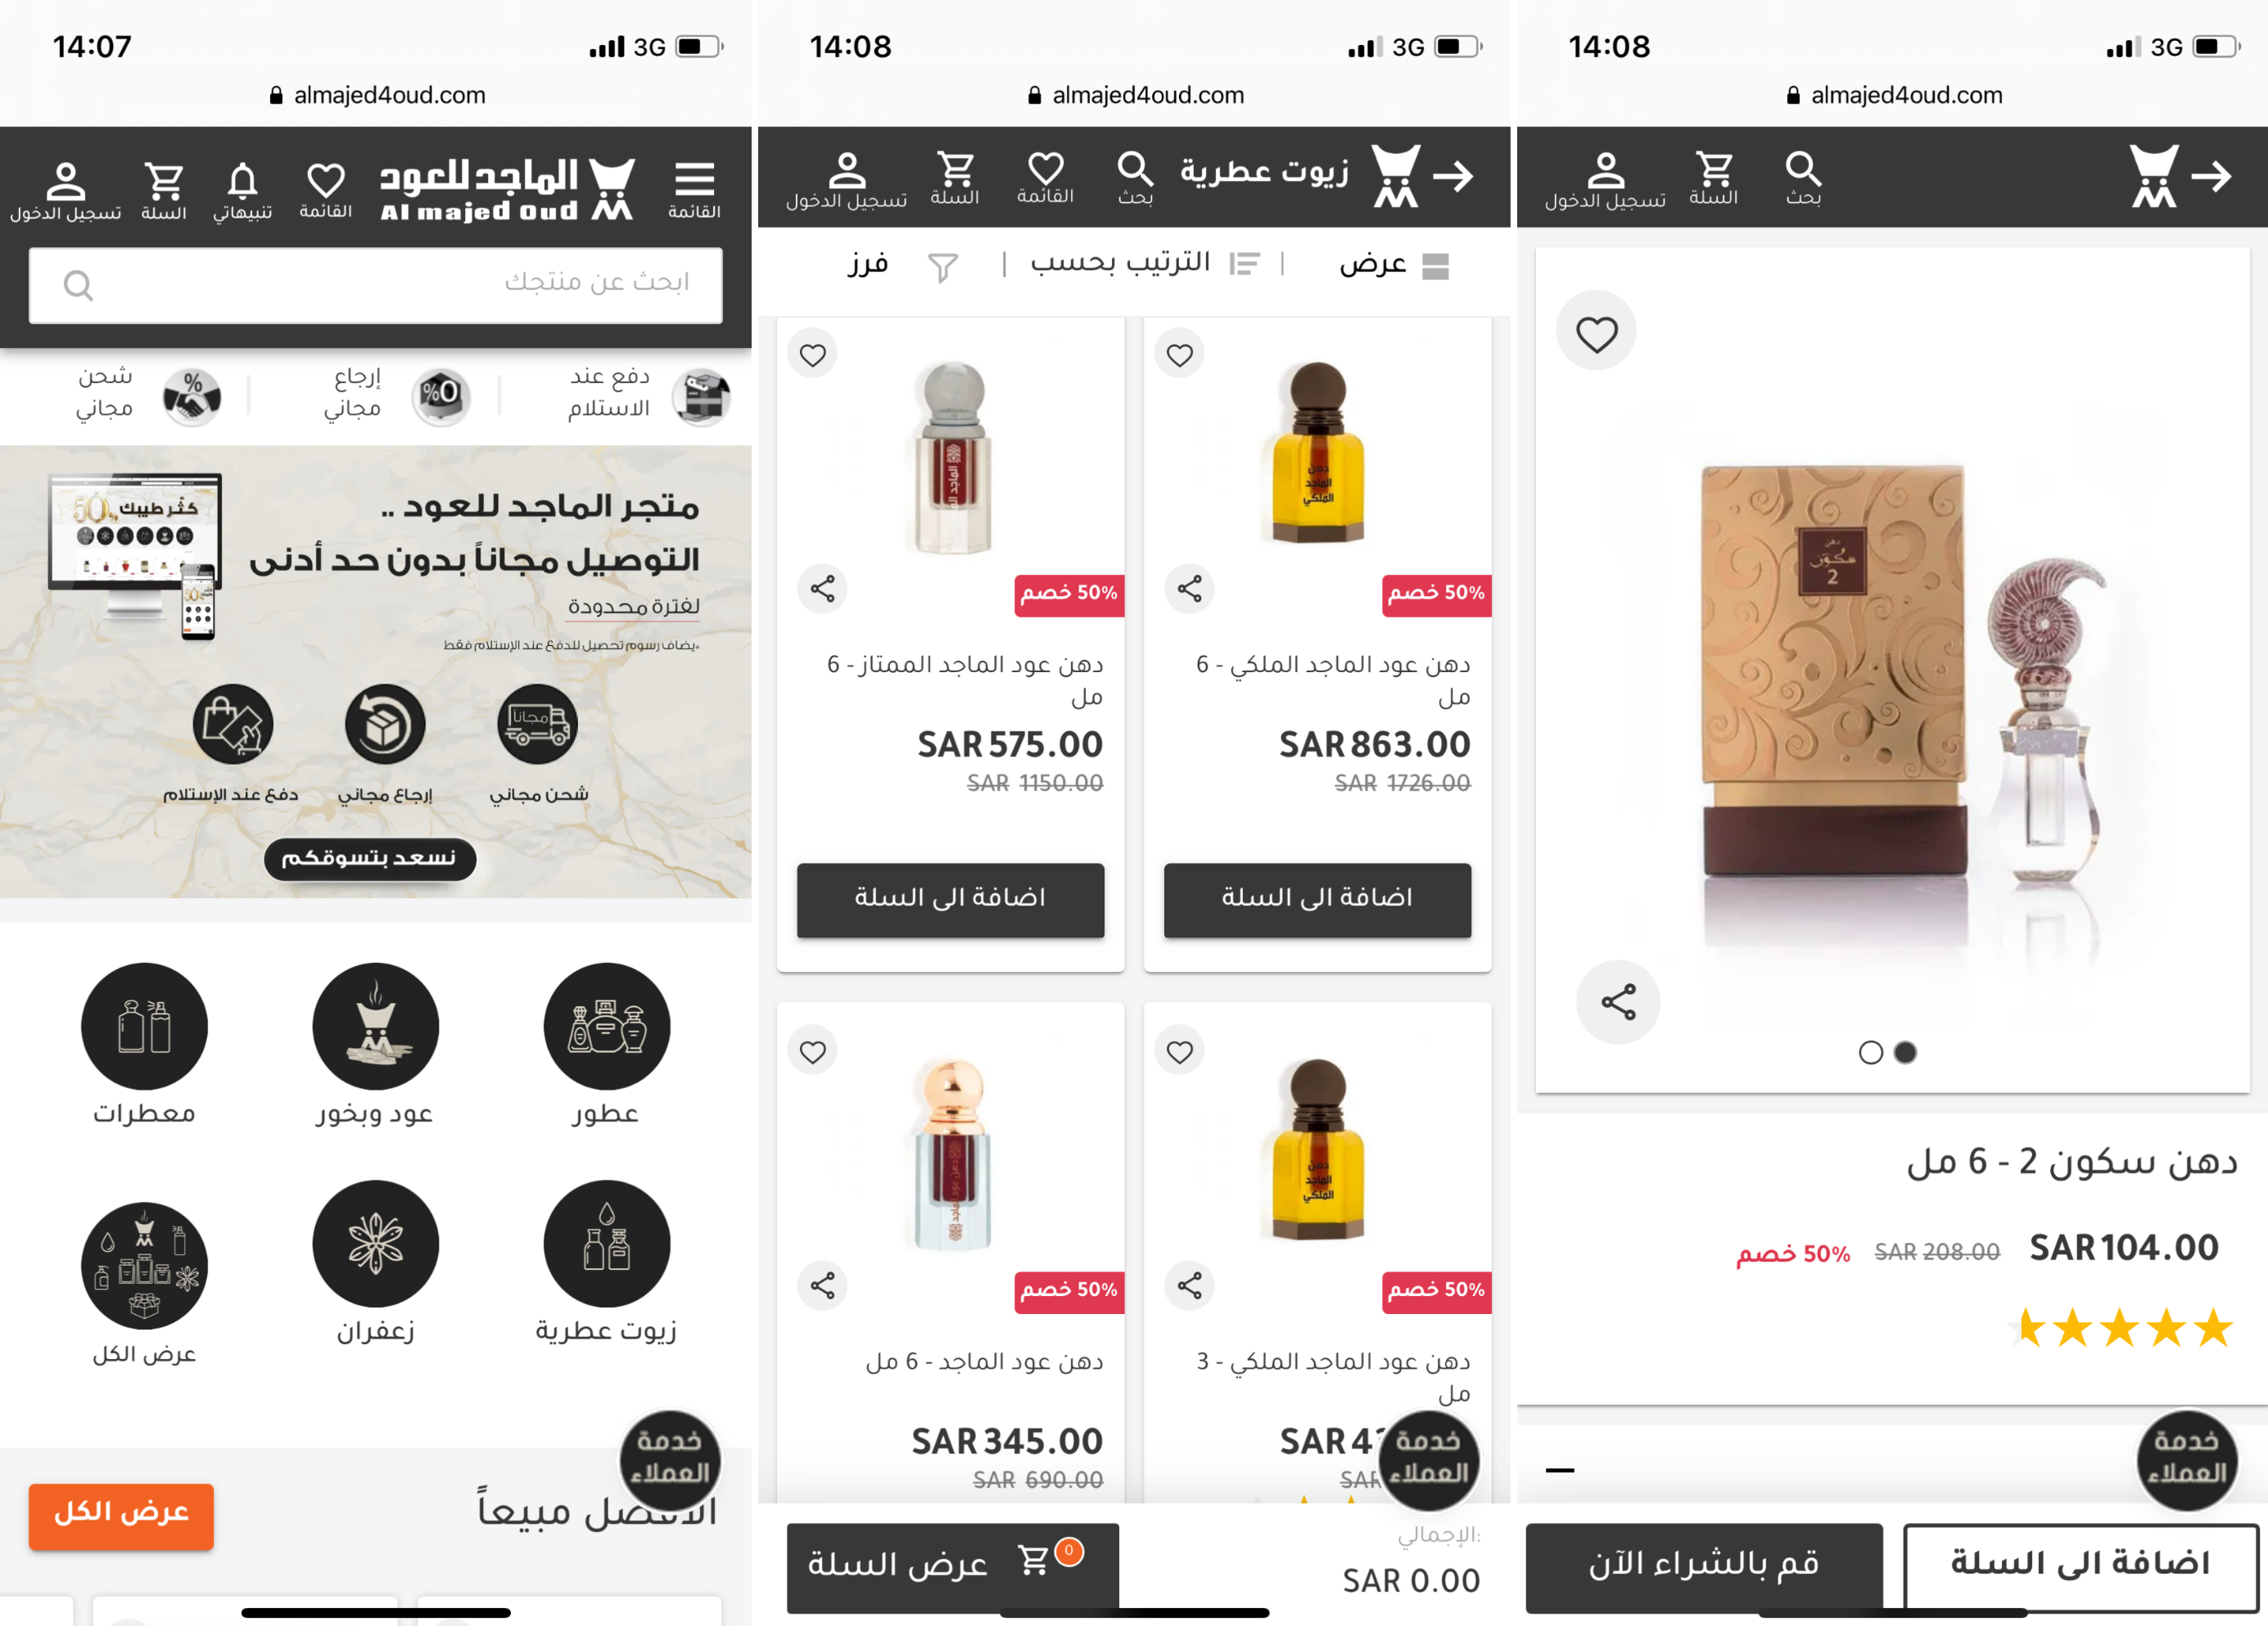 5 Key Things to Know About Product Page Design